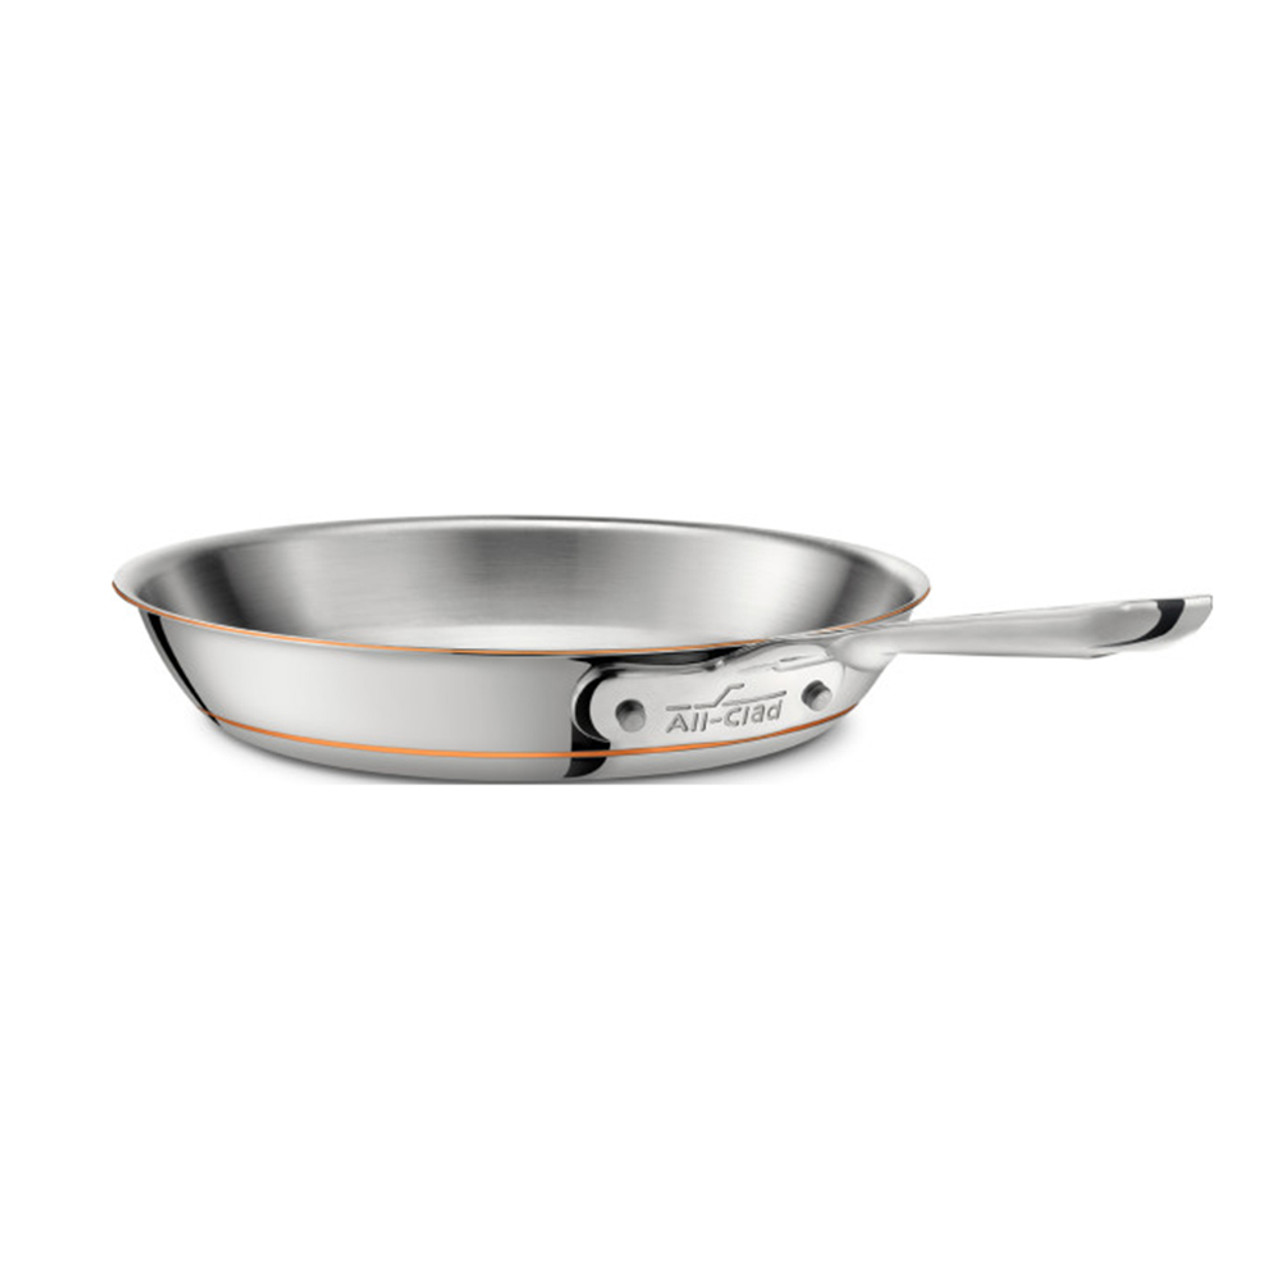 https://cdn11.bigcommerce.com/s-hccytny0od/images/stencil/1280x1280/products/507/1919/all-clad-copper-core-fry-pan-10-inch__24165.1511048175.jpg?c=2?imbypass=on